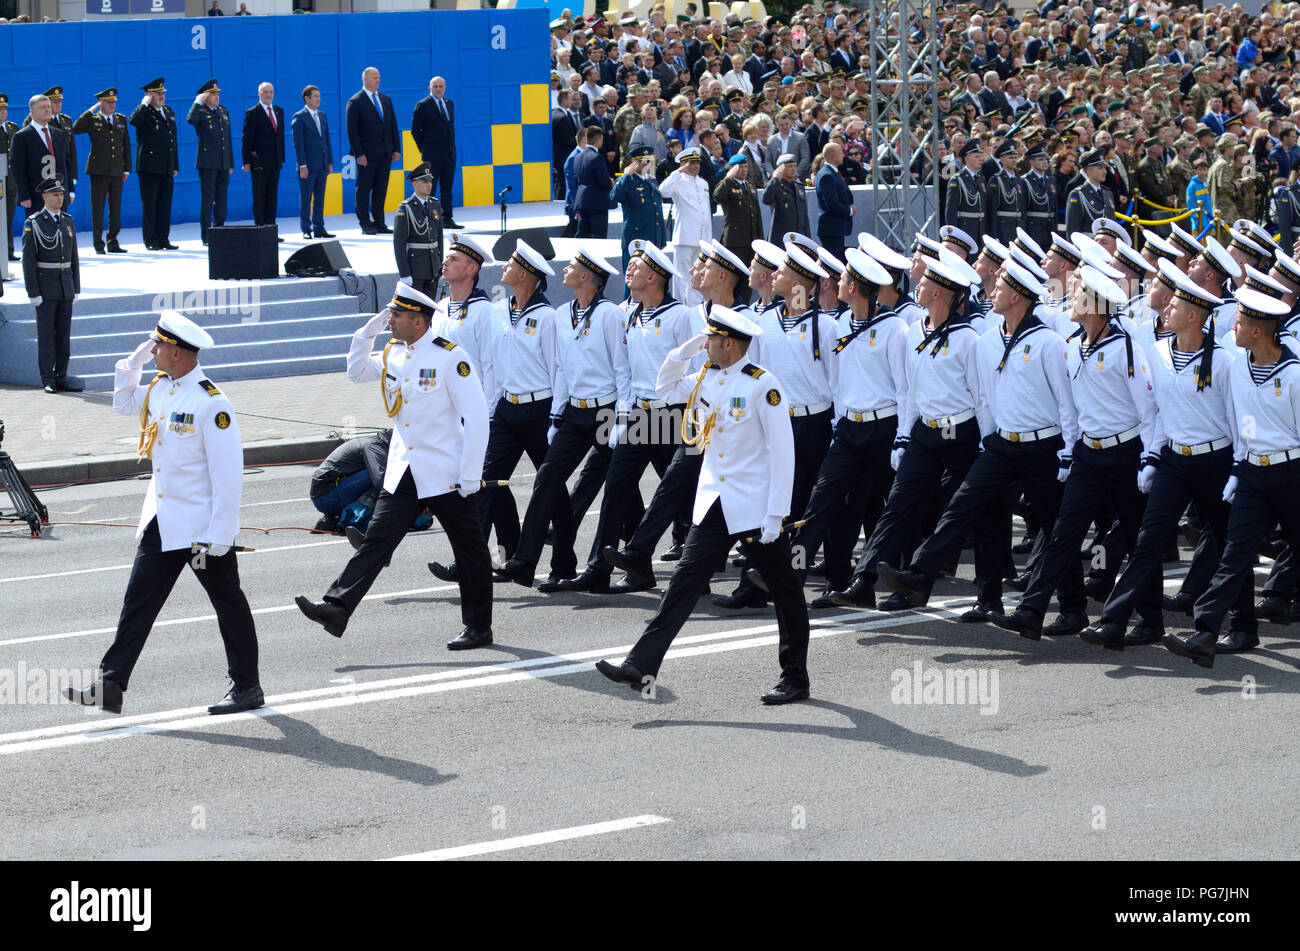 Ukrainian Navy men marching on a square during military parade dedicated to Day of Independence of Ukraine. August 24, 2017. Kiev, Ukraine Stock Photo